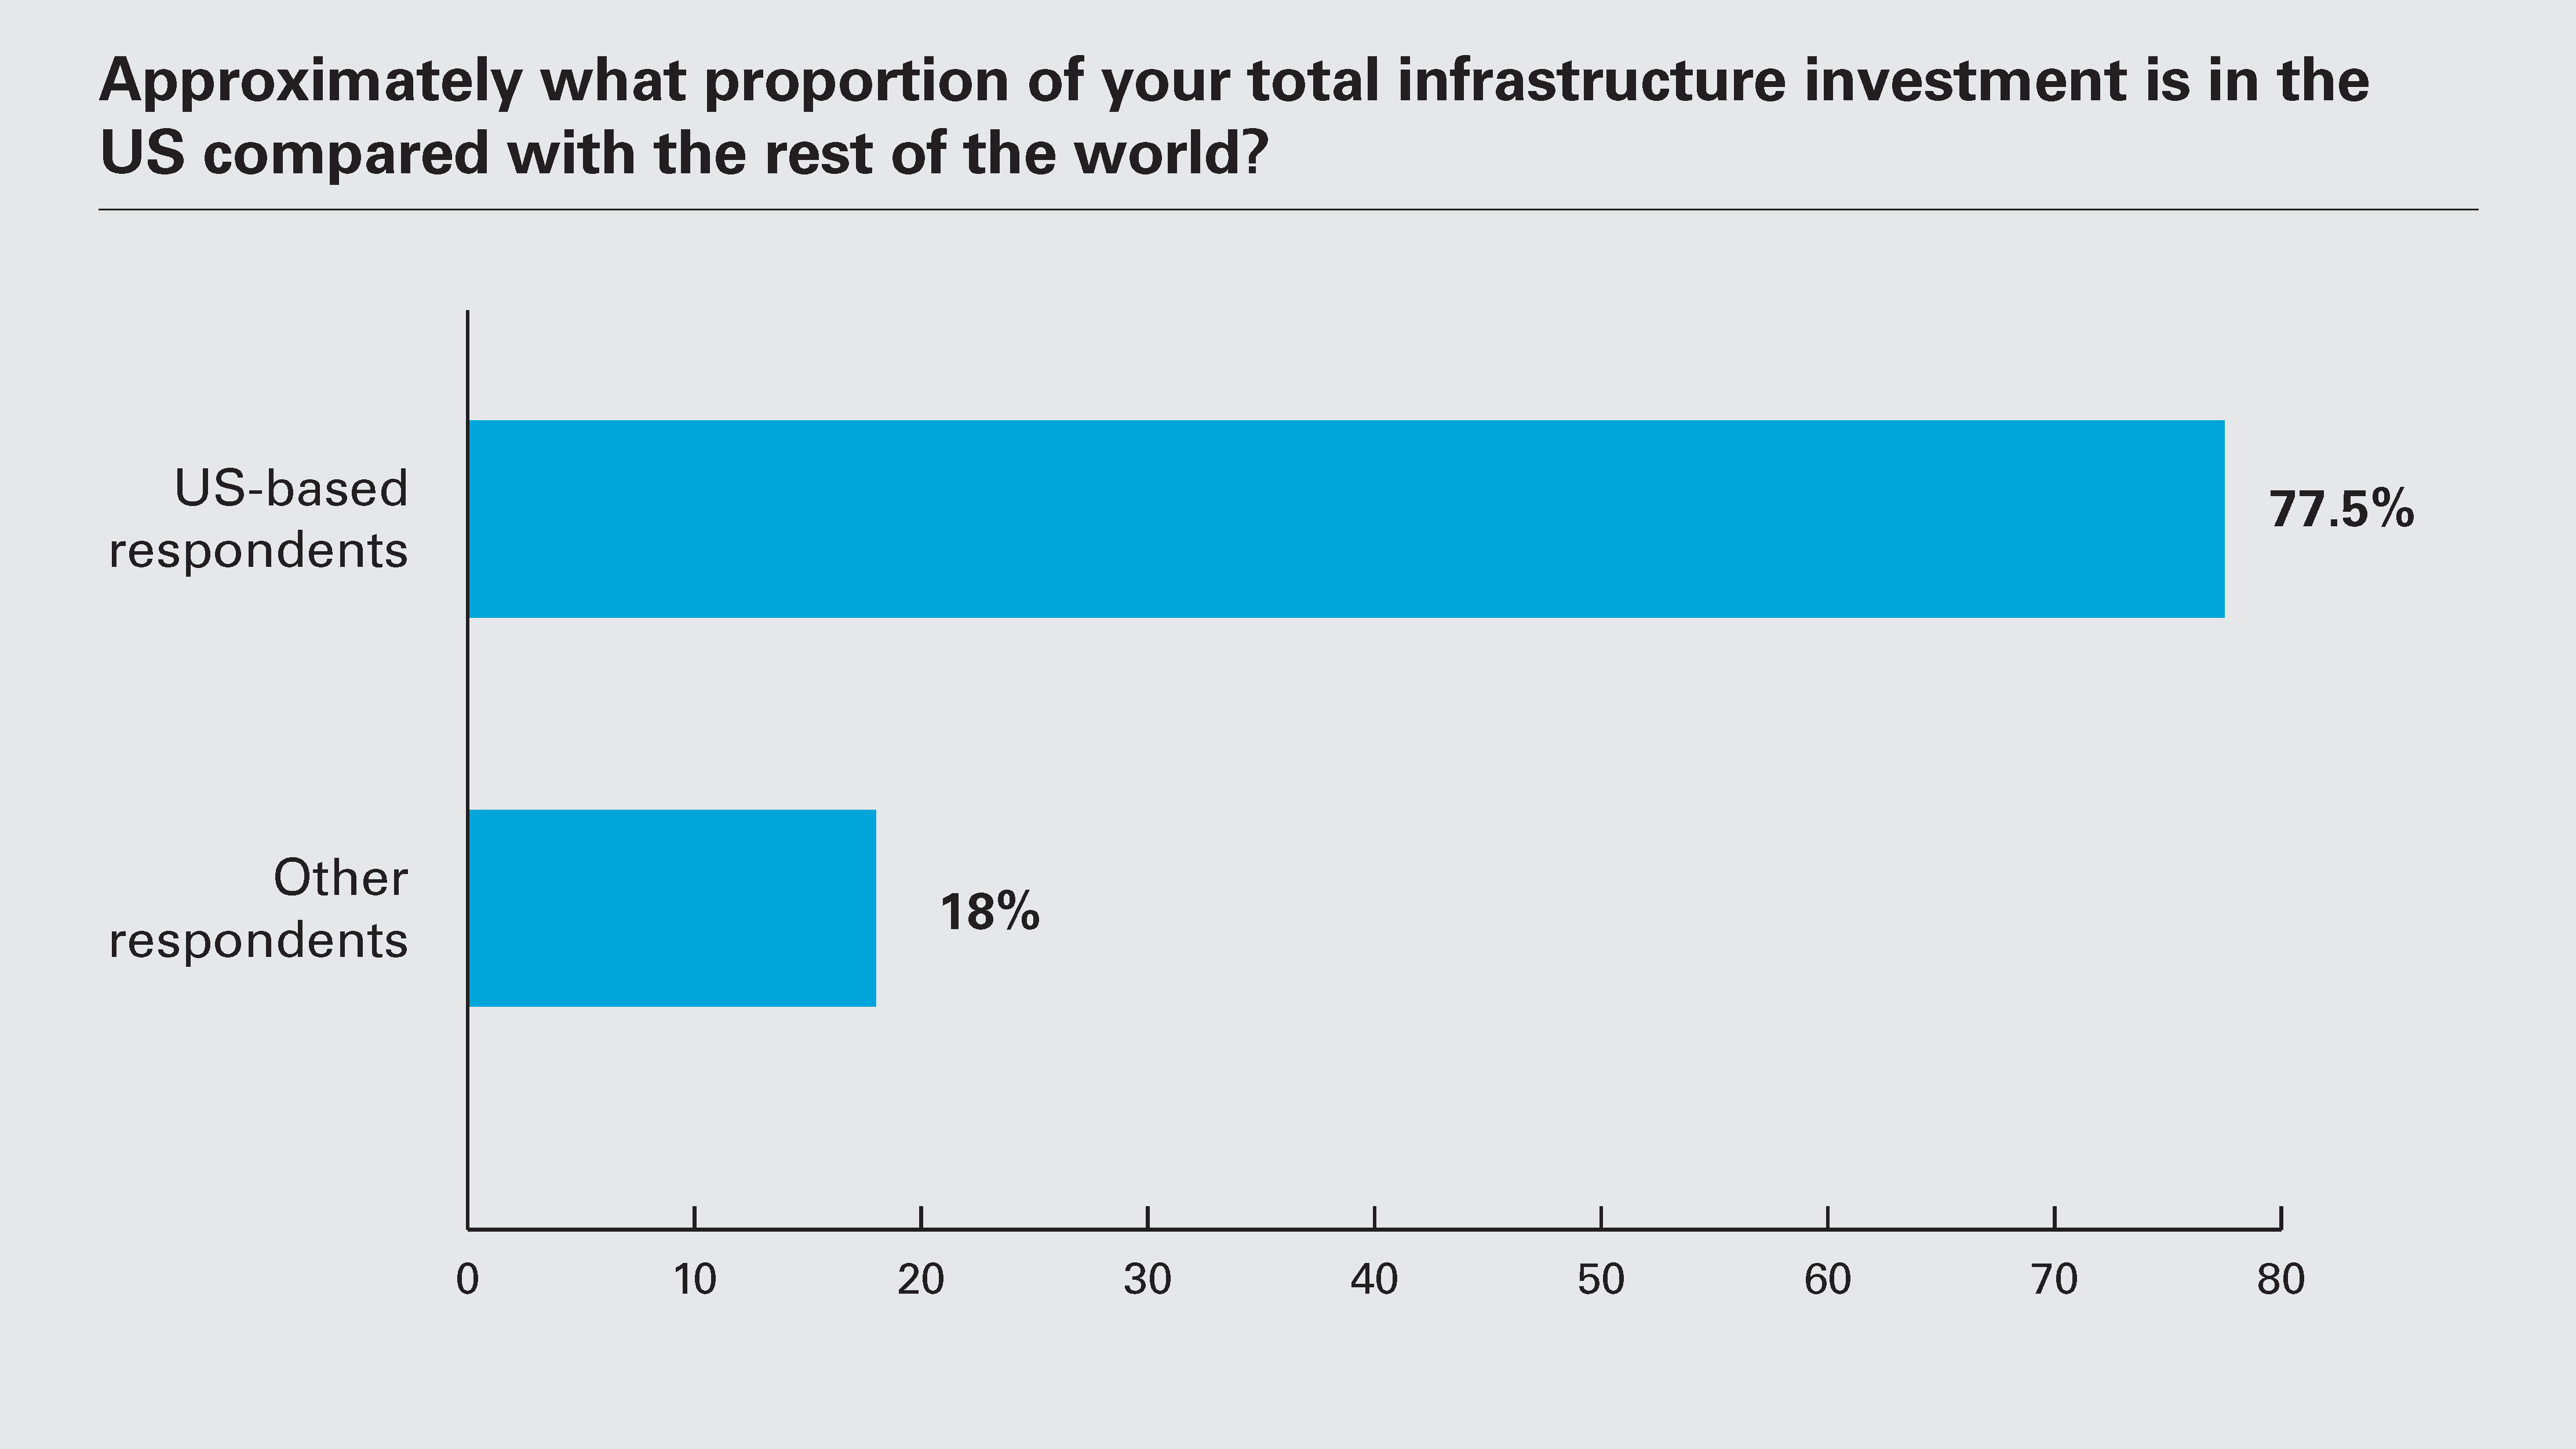 Approximately what proportion of your total infrastructure investment is in the US compared with the rest of the world?